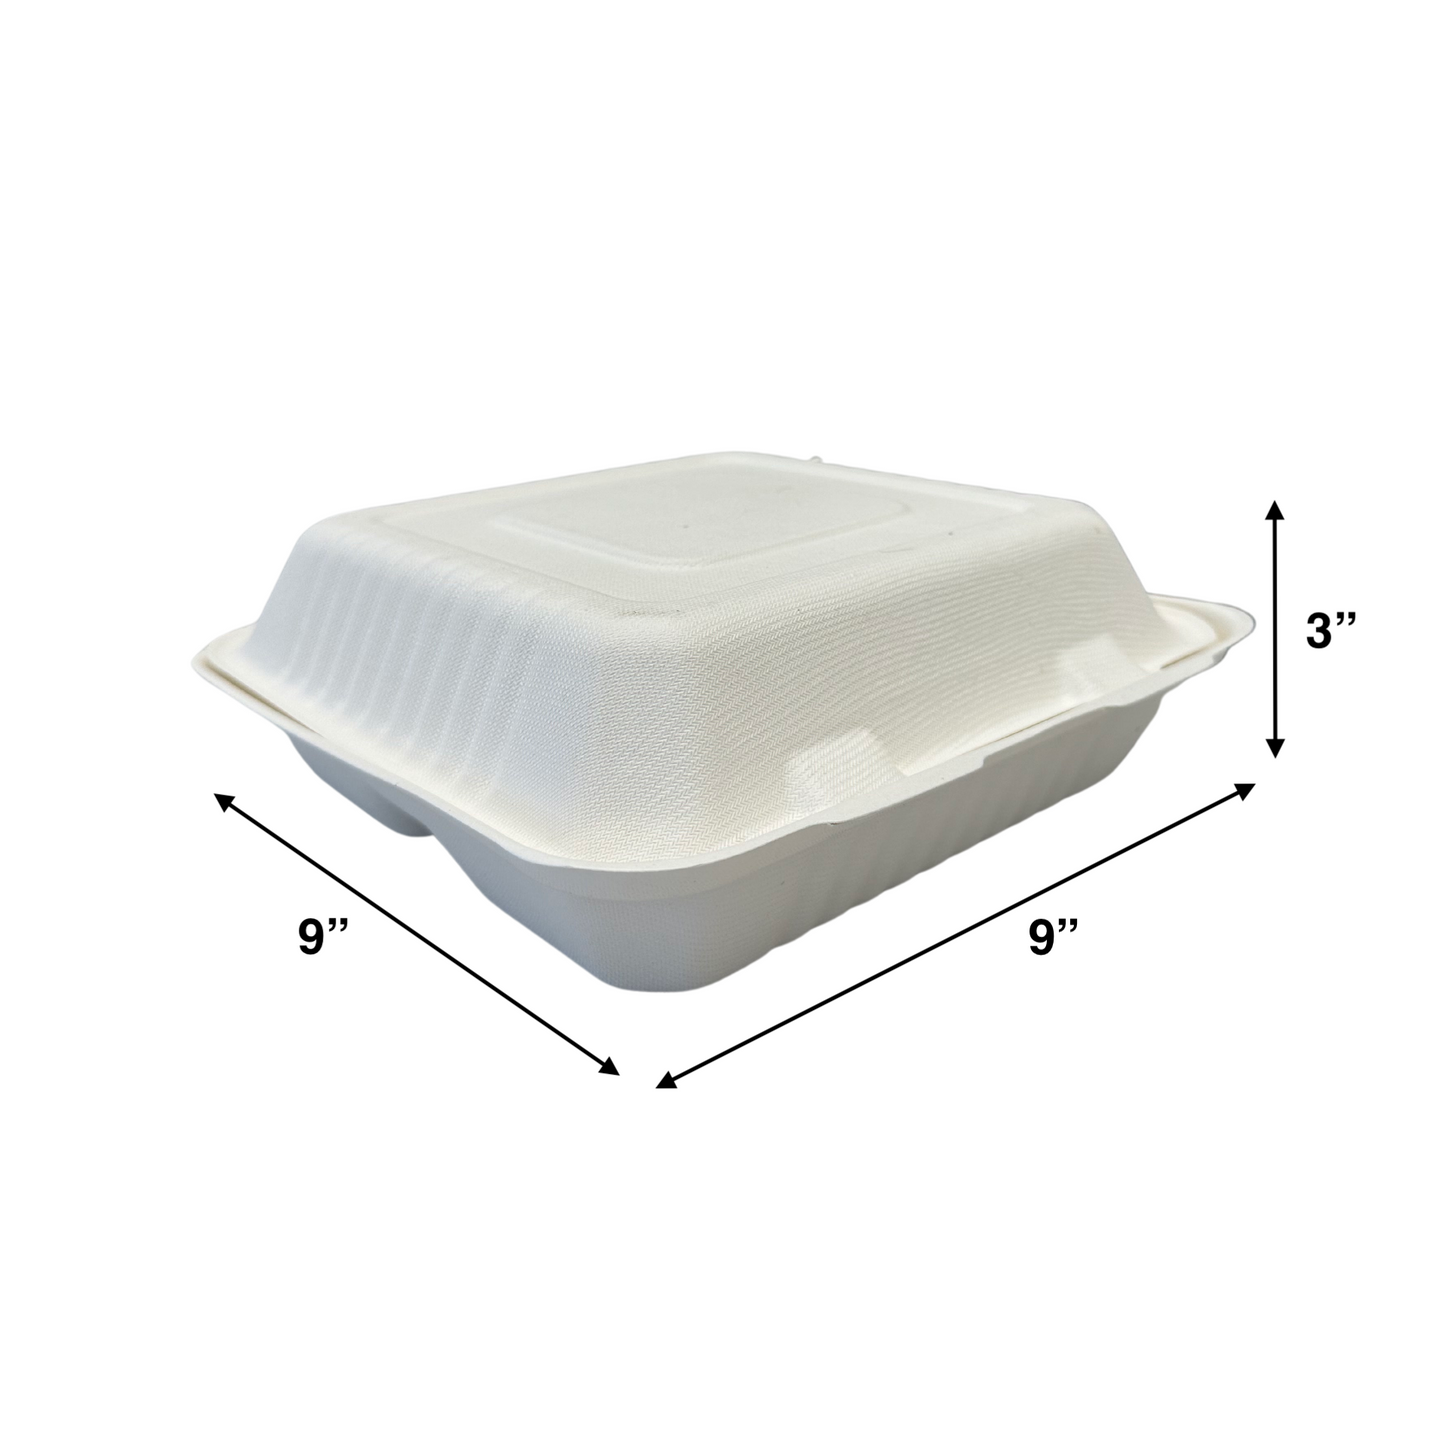 KIS-S9933 | 9x9x3 inches, 3-Compartment, Sugarcane Clamshell Food Container; $0.277/pc